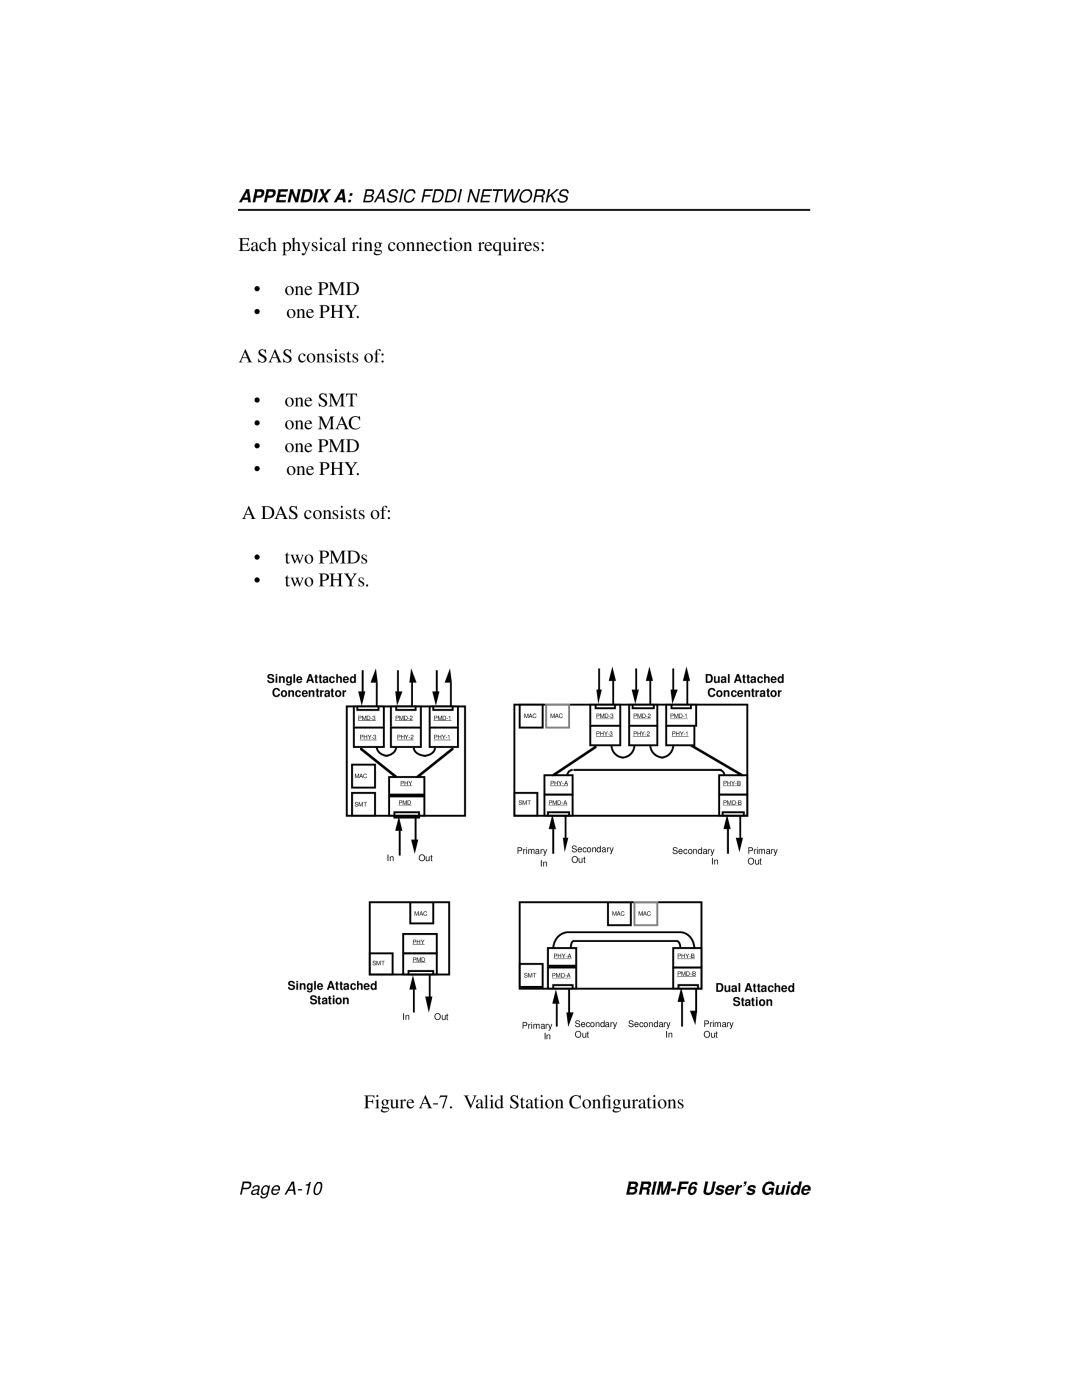 Cabletron Systems manual Appendix A Basic Fddi Networks, Page A-10, BRIM-F6 User’s Guide, Single Attached, Concentrator 